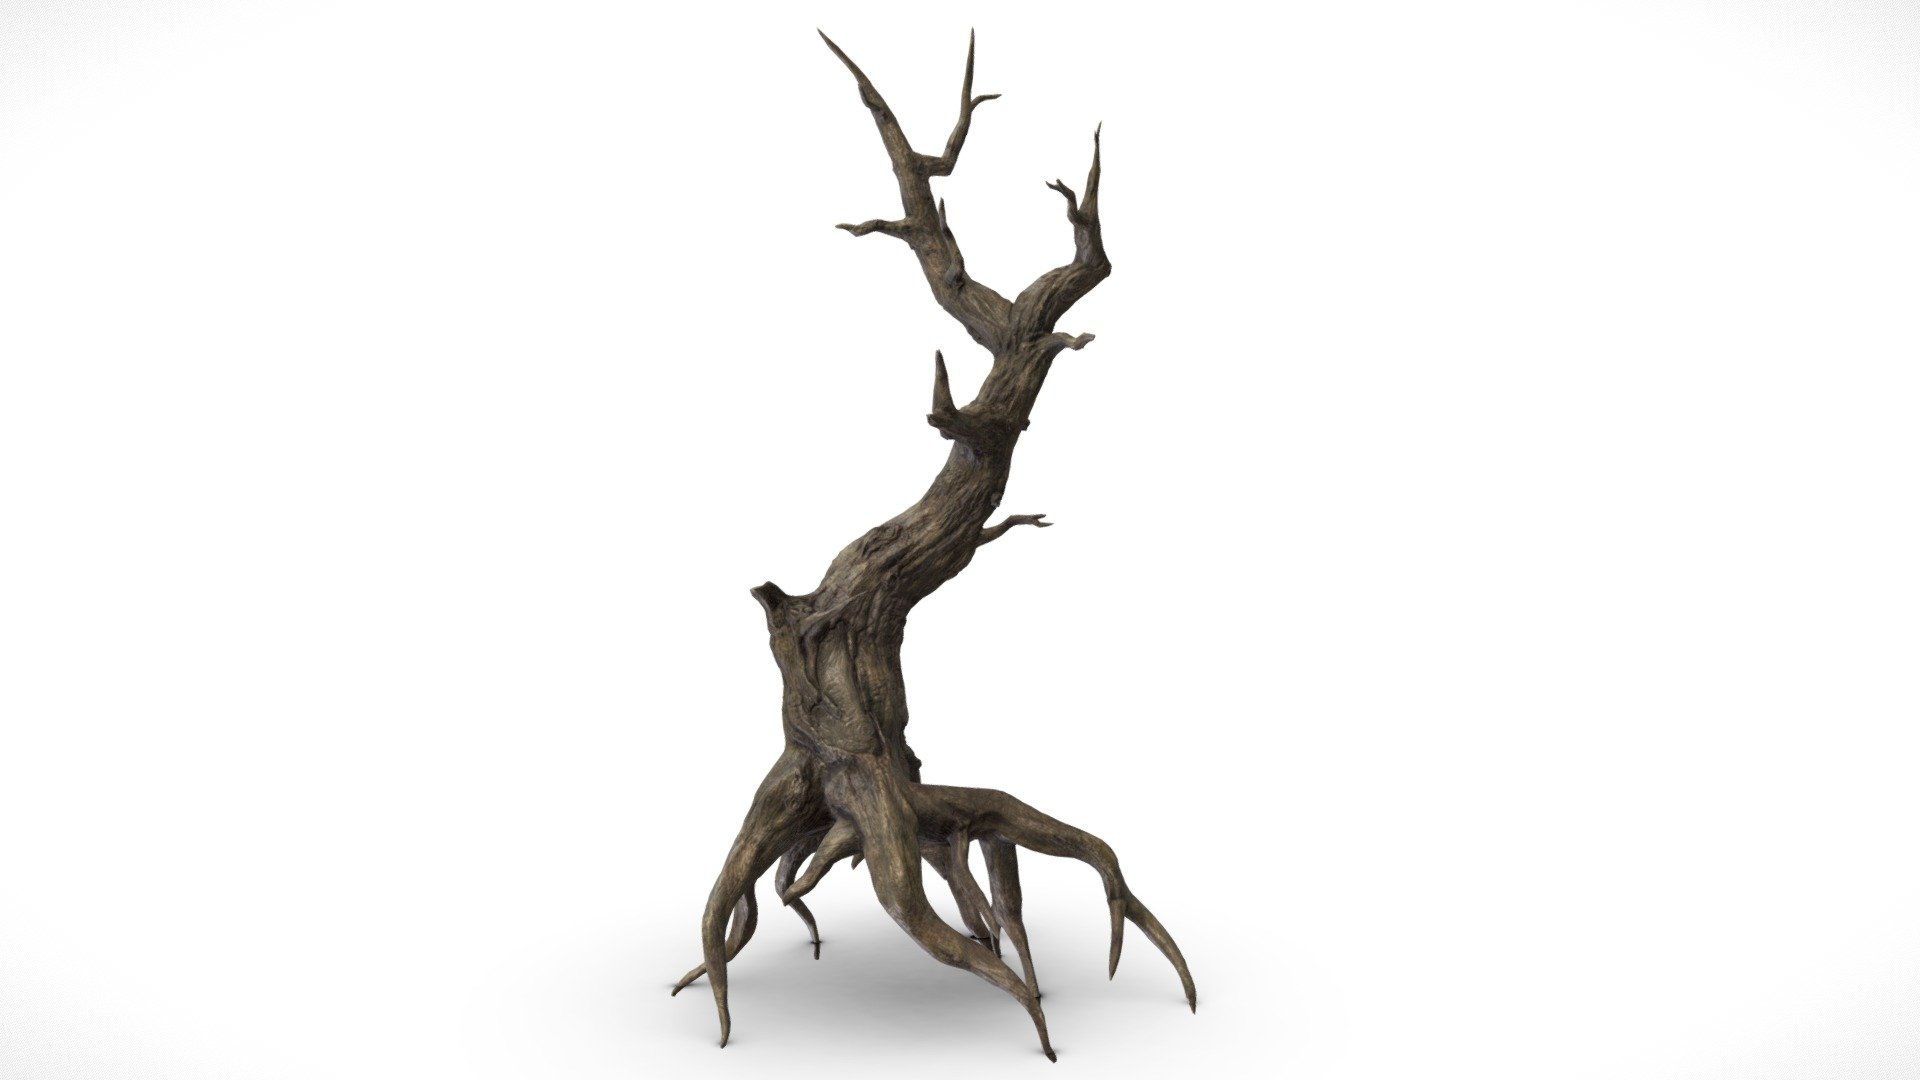 This Tree Mesh is made up of 1 UV Map, with 4096x4096 resolution.
Textures contained are:
- Diffuse
- Metallic
- Normal
- Roughness - Fantasy Dark Forest - Scary Dead Tree B - Buy Royalty Free 3D model by Davis3D 3d model